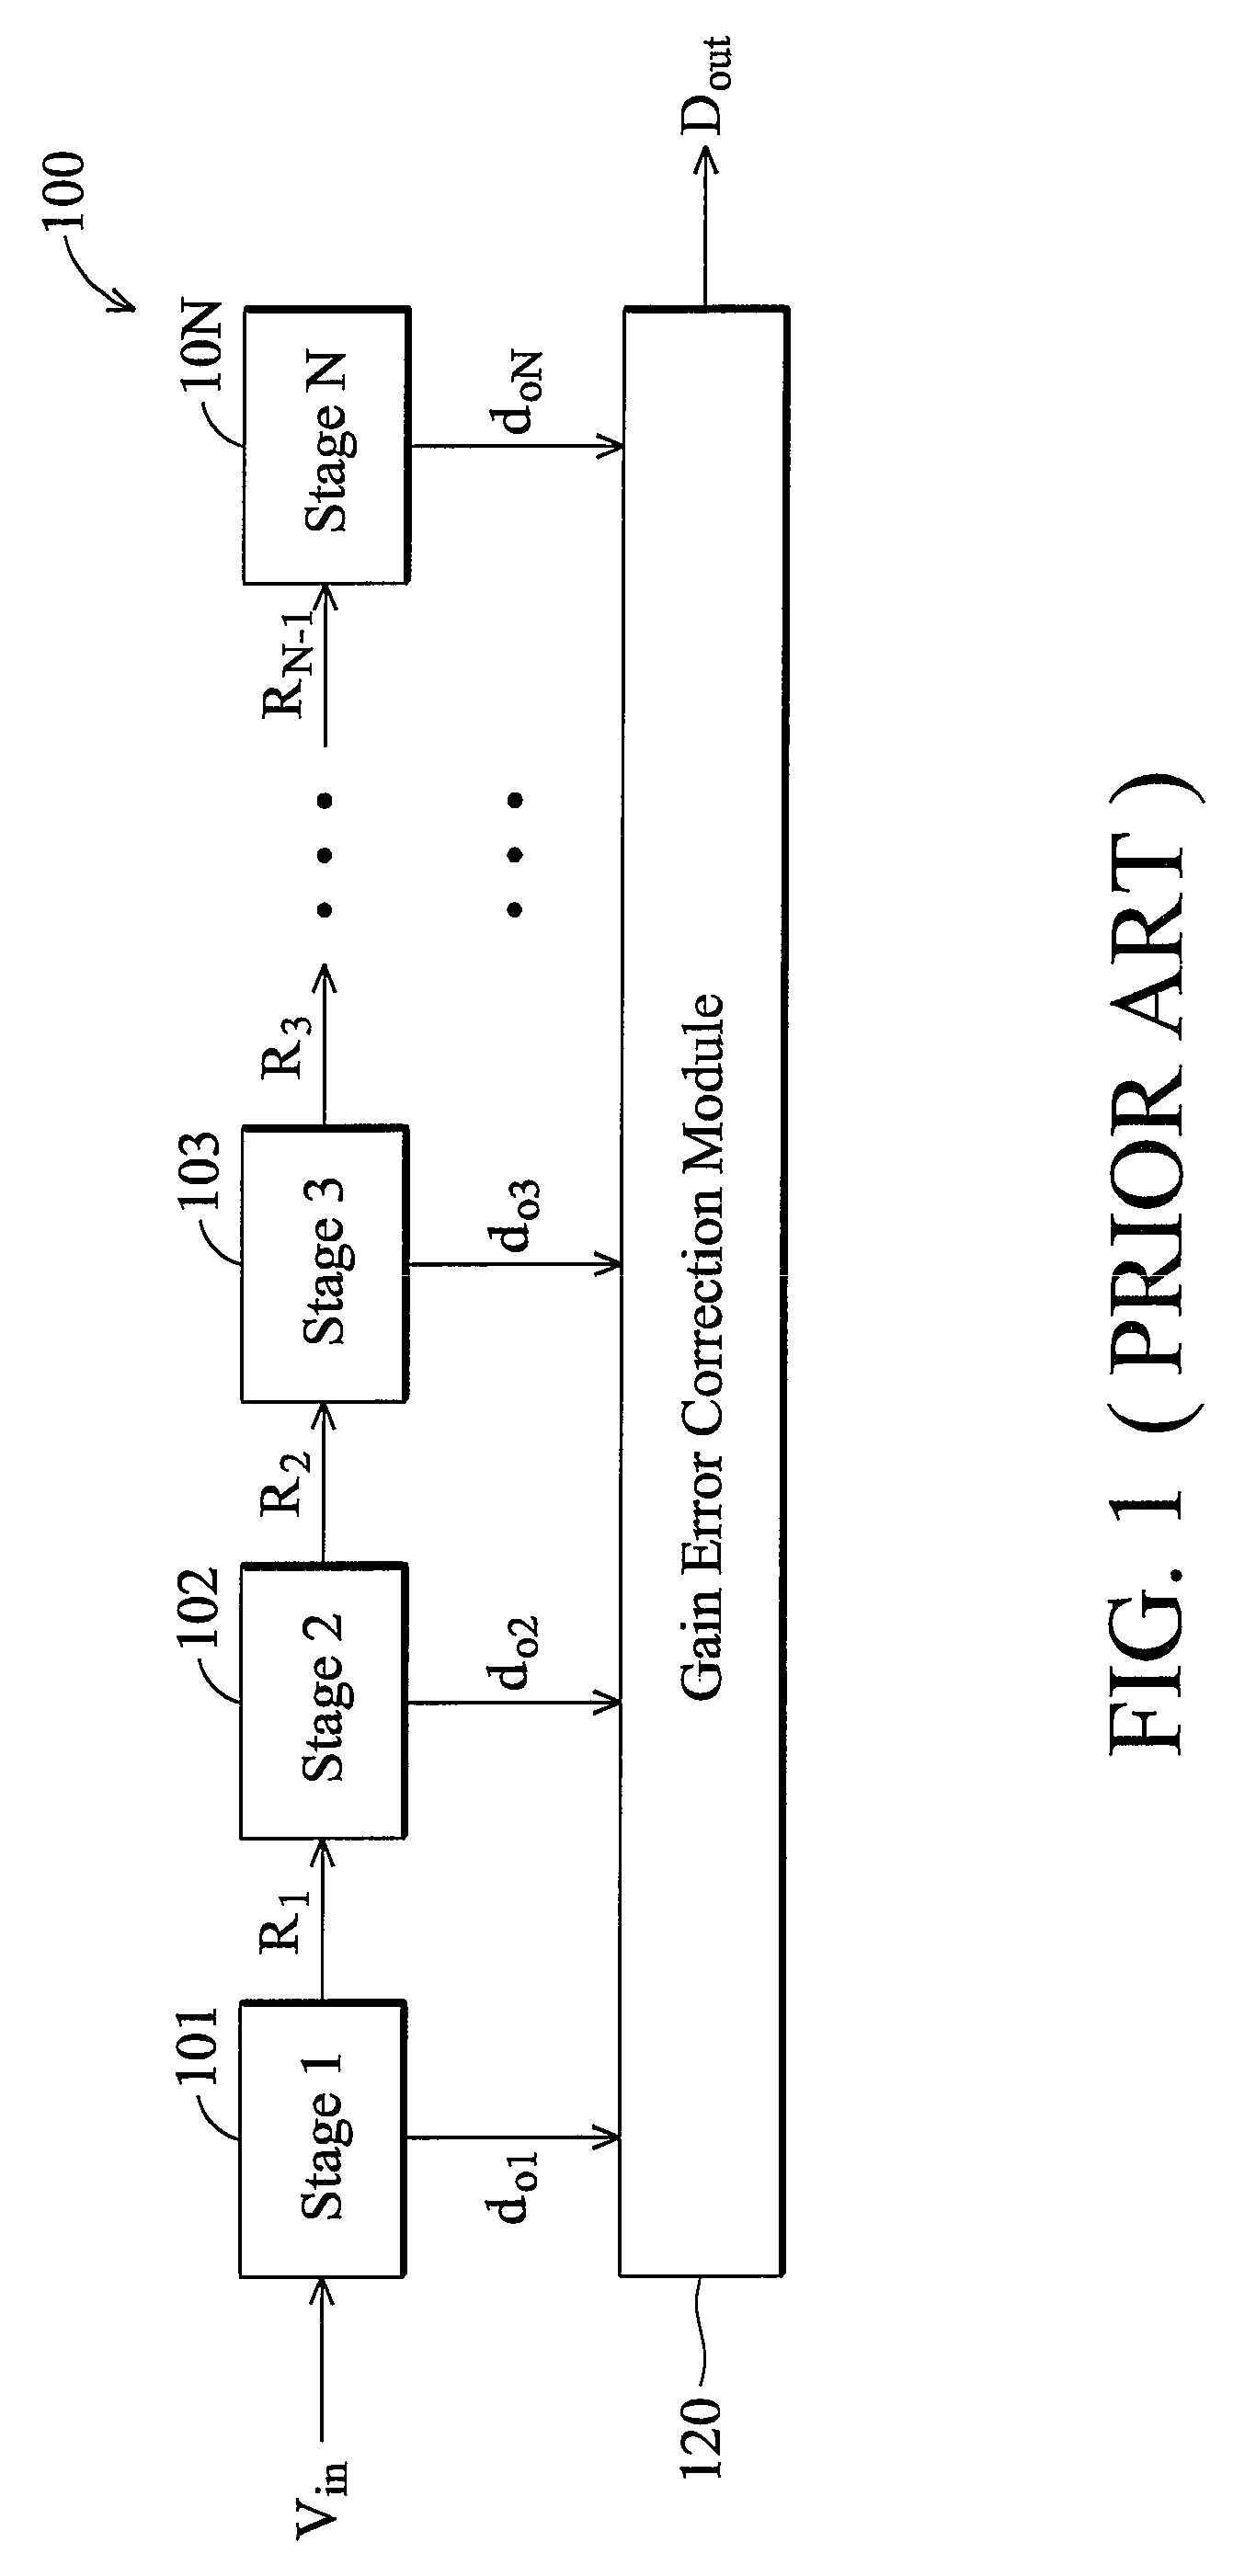 Method of gain error calibration in a pipelined analog-to-digital converter or a cyclic analog-to-digital converter